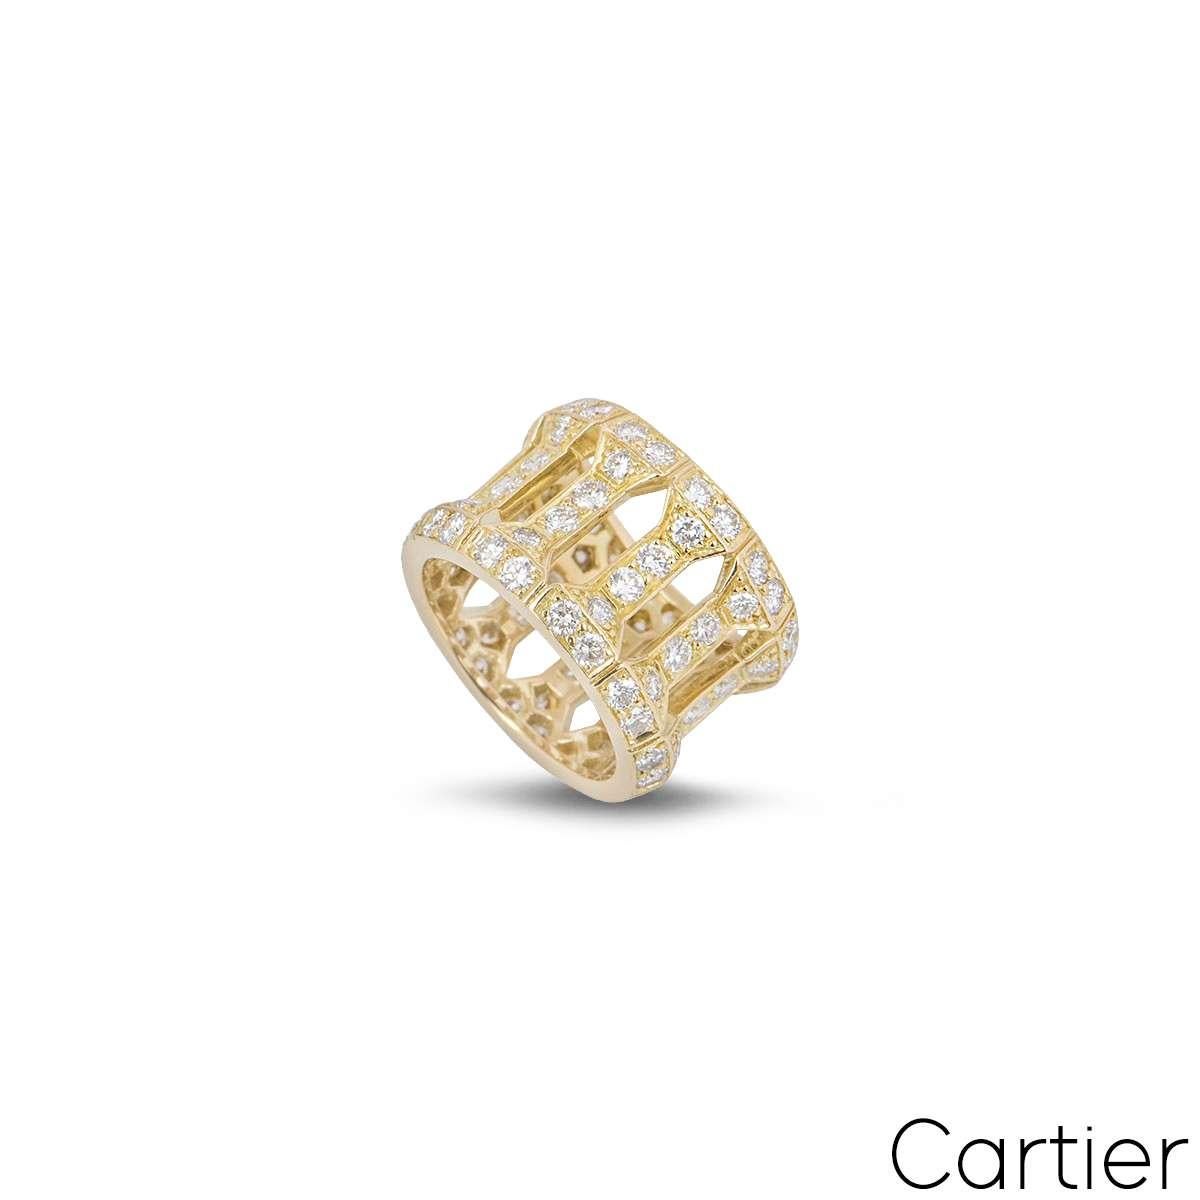 A stunning yellow gold diamond dress ring by Cartier. The ring is formed of 11 pillar style links, each set with 8 round brilliant cut diamonds. There are 88 diamonds in total with an approximate carat weight of 3.52ct, predominantly G colour and VS